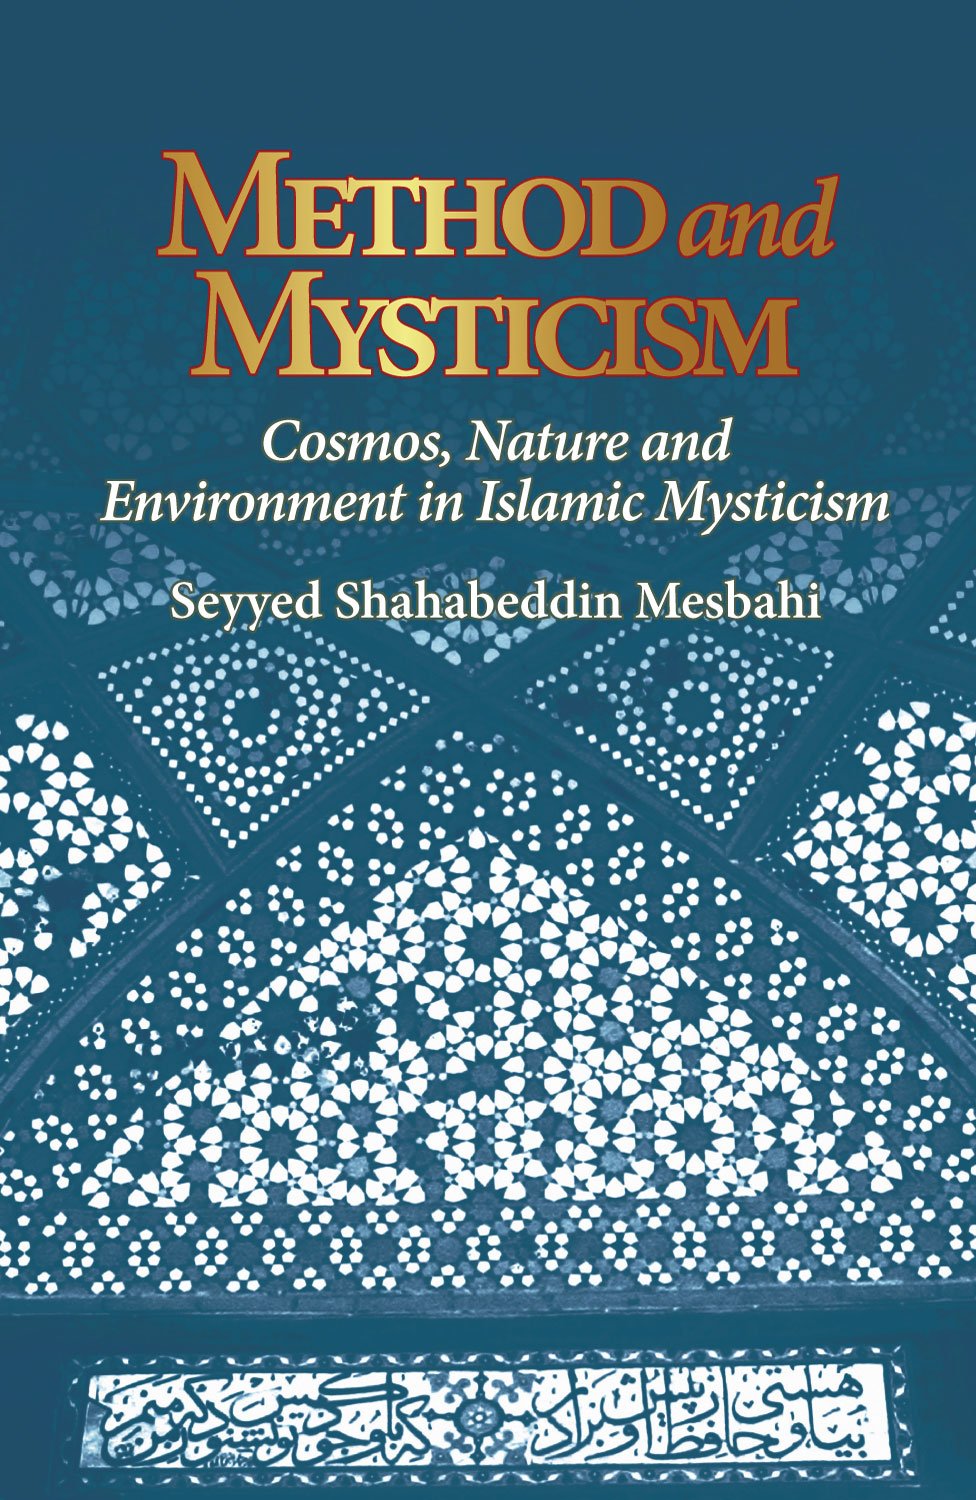 Method and Mysticism: Cosmos, Nature and Environment in Islamic Mysticism